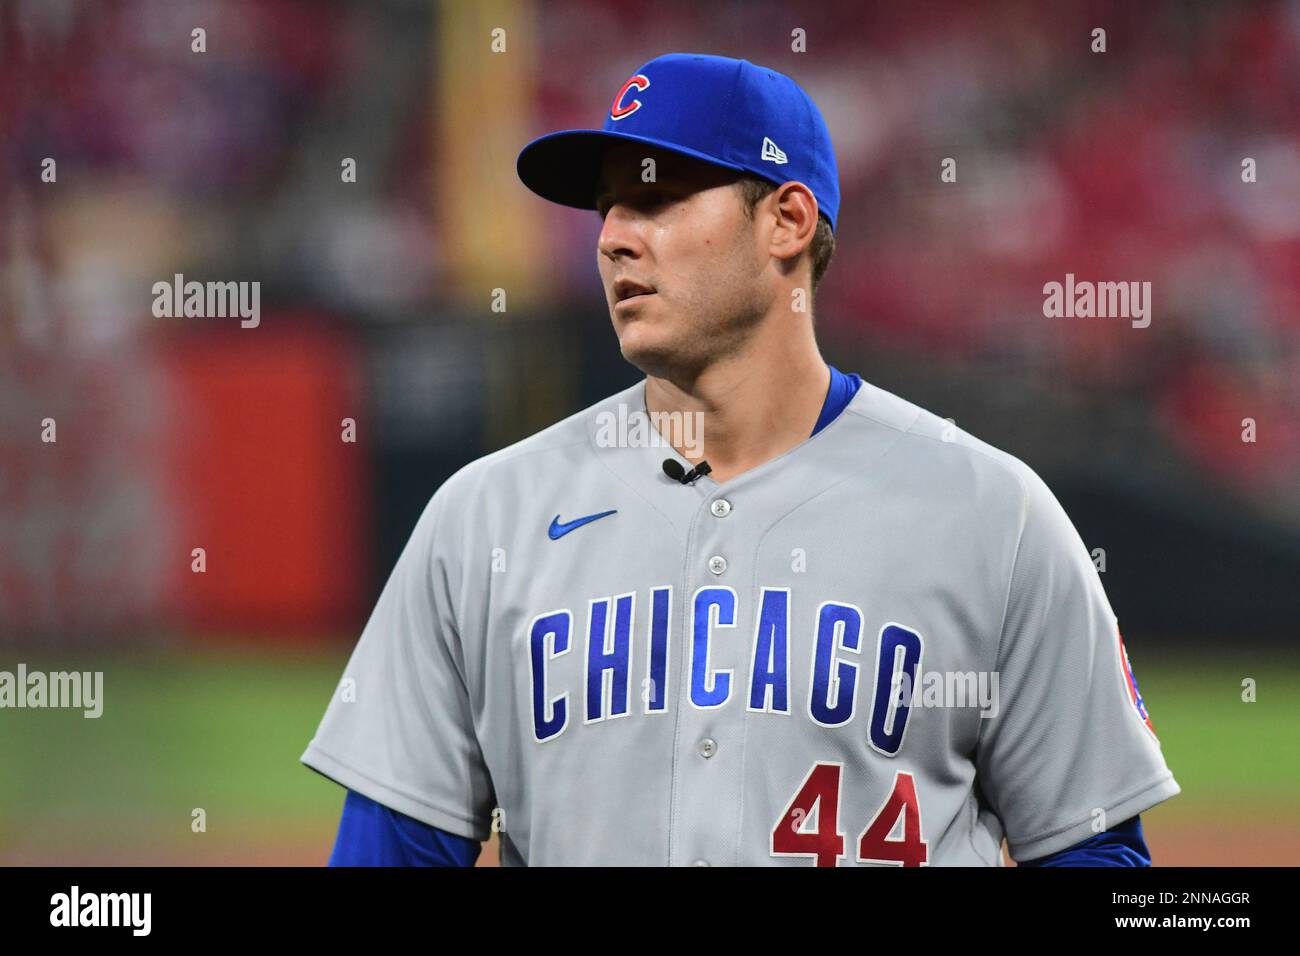 ST. LOUIS, MO - MAY 22: Chicago Cubs first baseman Anthony Rizzo (44)  during a Major League Baseball game between the Chicago Cubs and the St.  Louis Cardinals on May 22, 2021